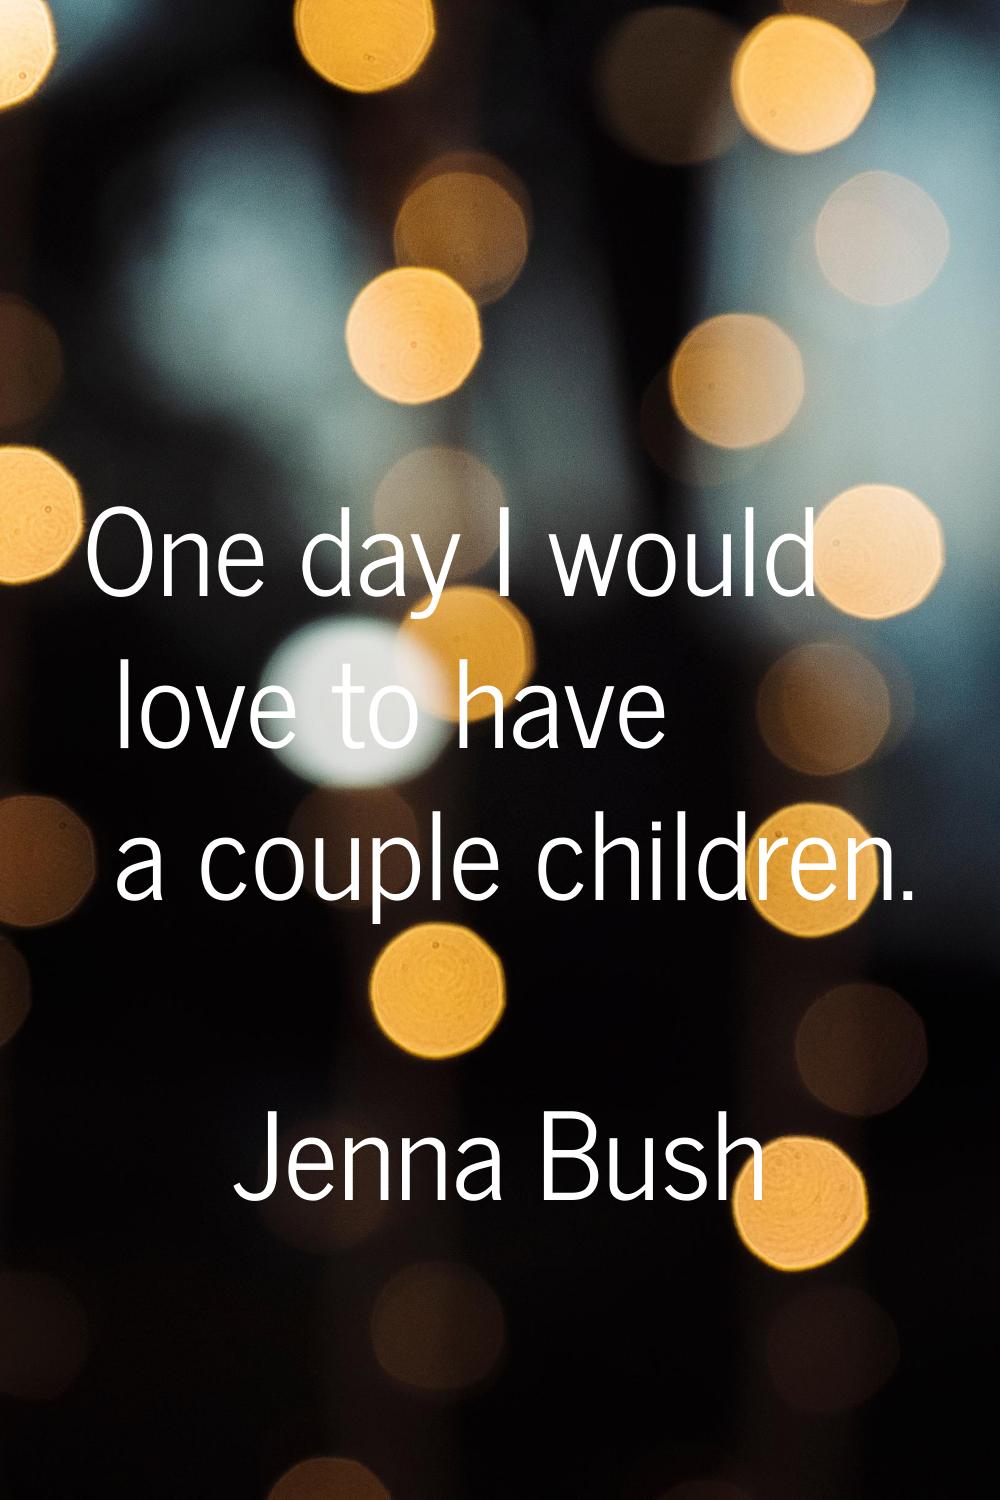 One day I would love to have a couple children.